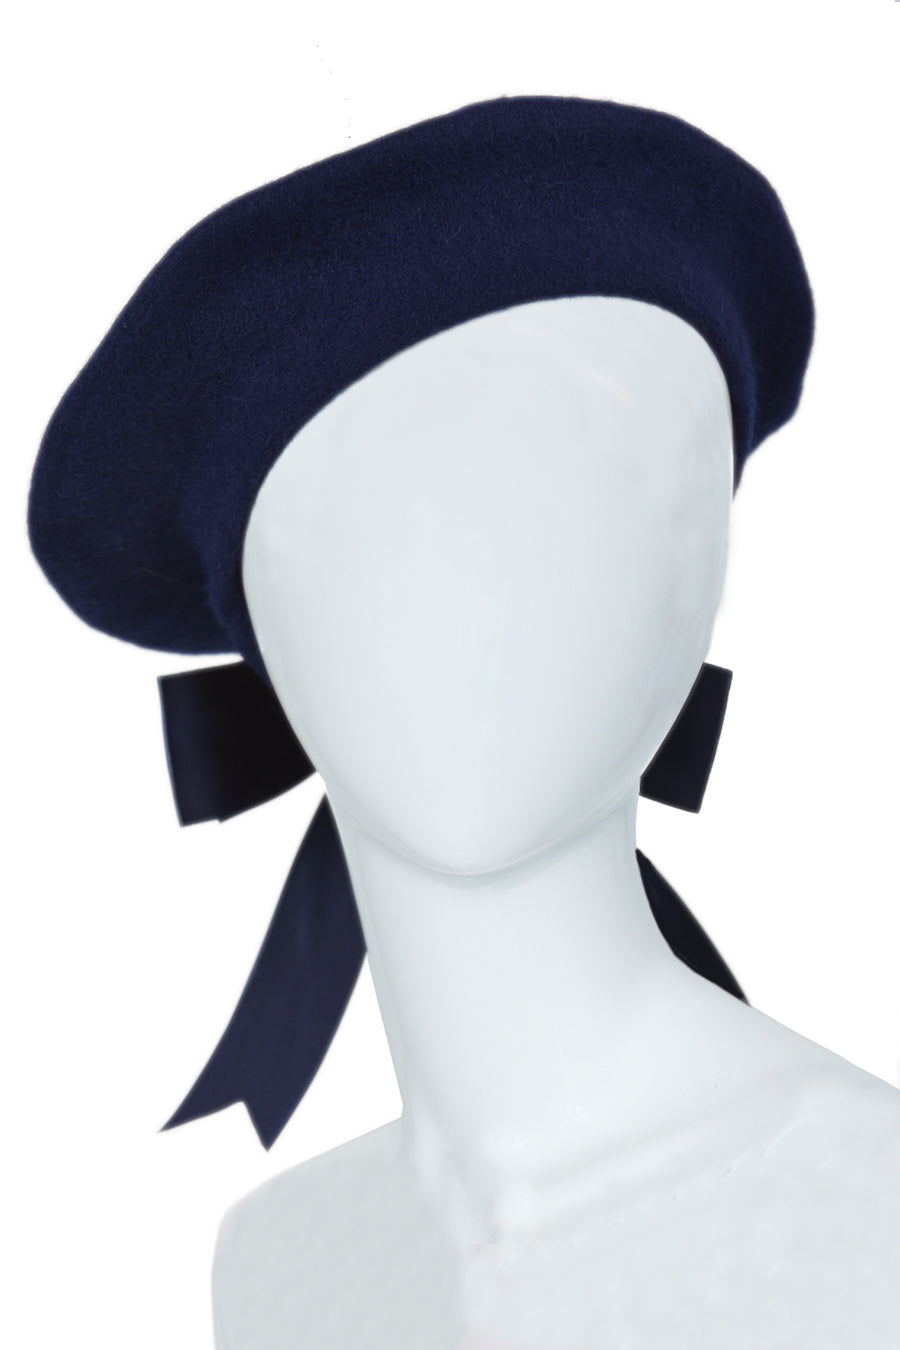 béret navy dark blue béret bow at the back french brothers and sistres